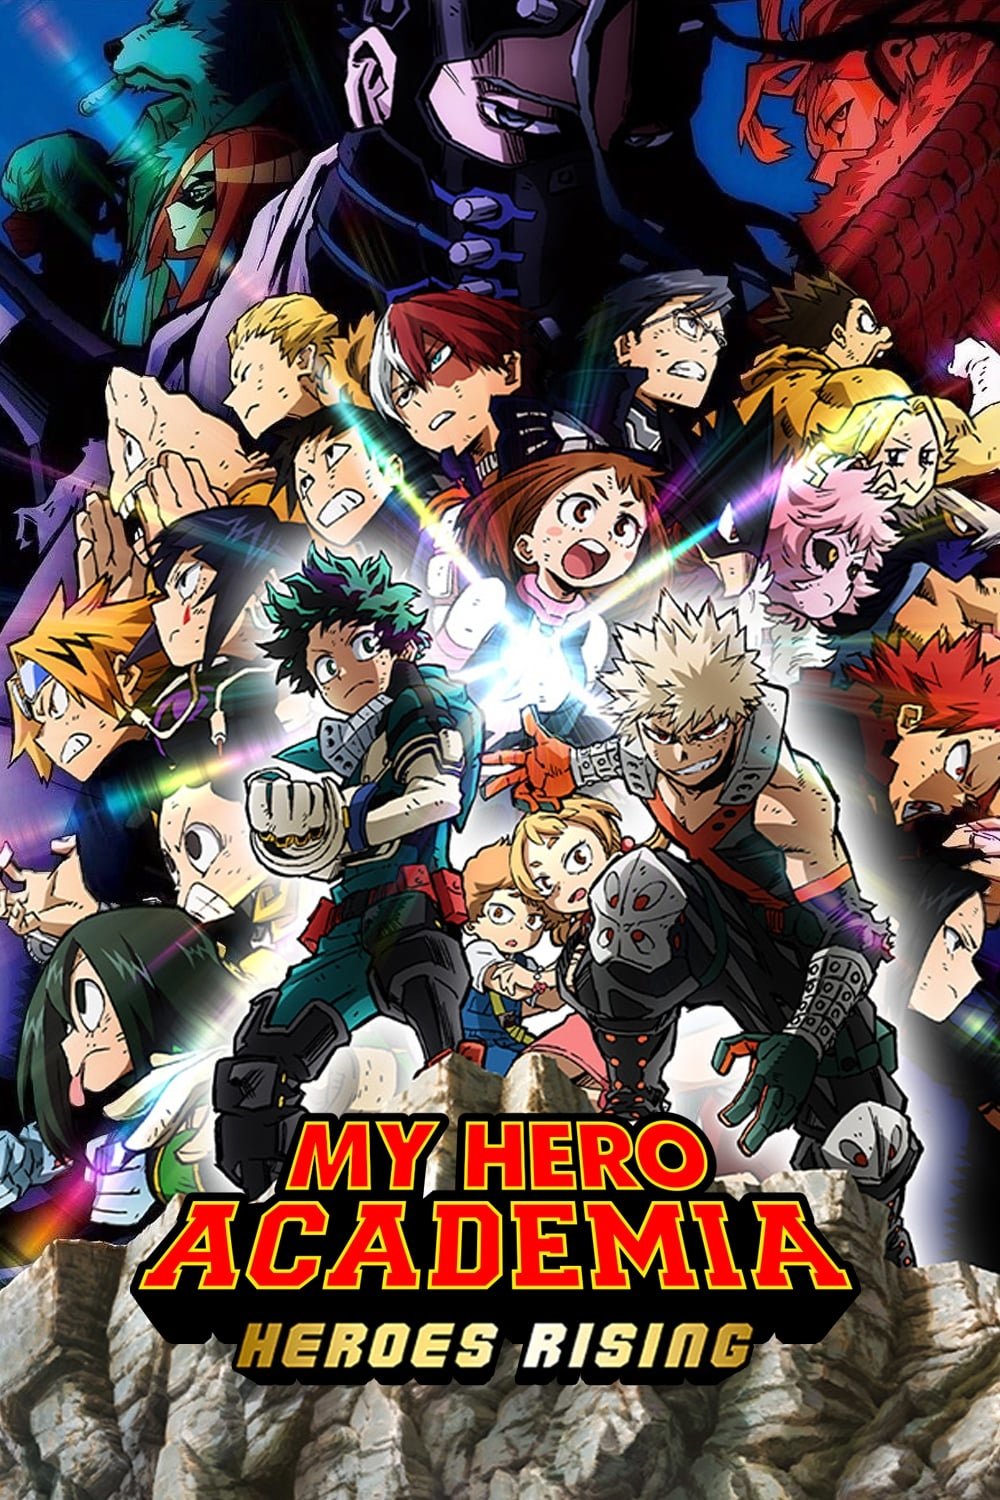 My Hero Academia: Heroes Rising Movie Poster - ID: 332007 - Image Abyss